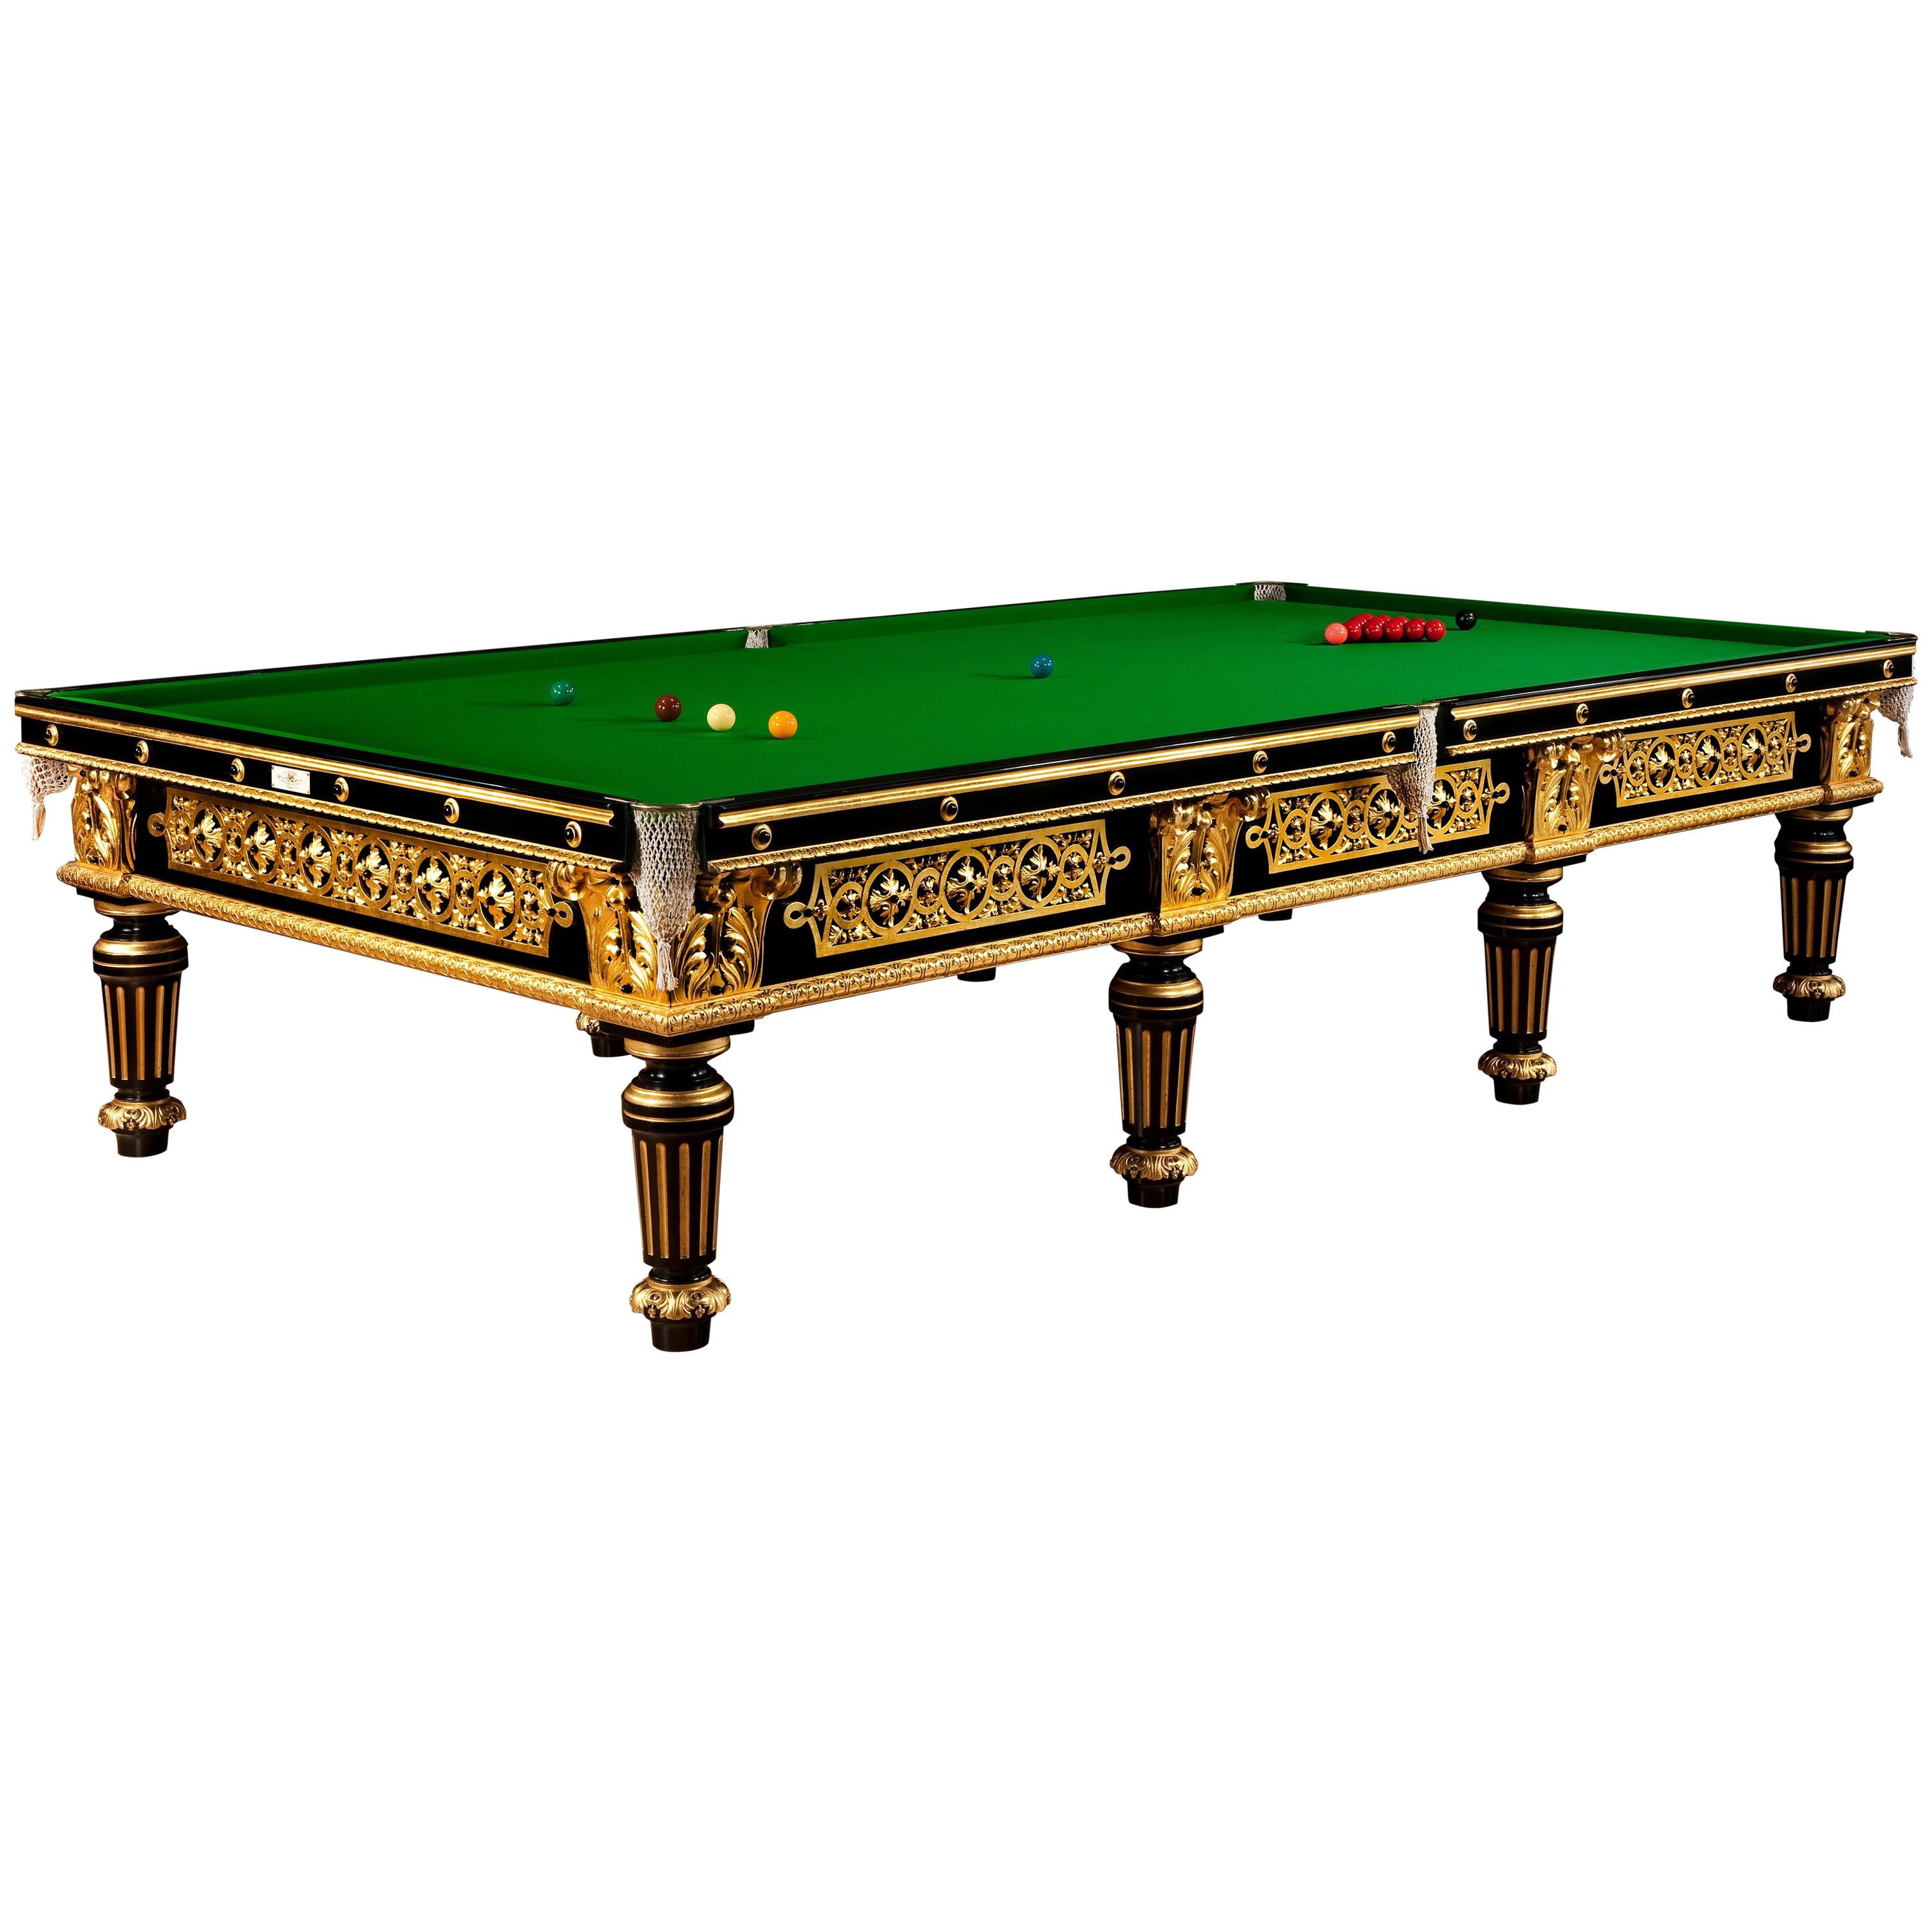 This striking full size (12ft) Billiard table was made for James Blyth, 1st Baron Blyth (1841-1925) for 33 Portland Place, London. It is veneered in ebony with openwork giltwood panels applied to the sides and boldly carved and gilded acanthus leaf